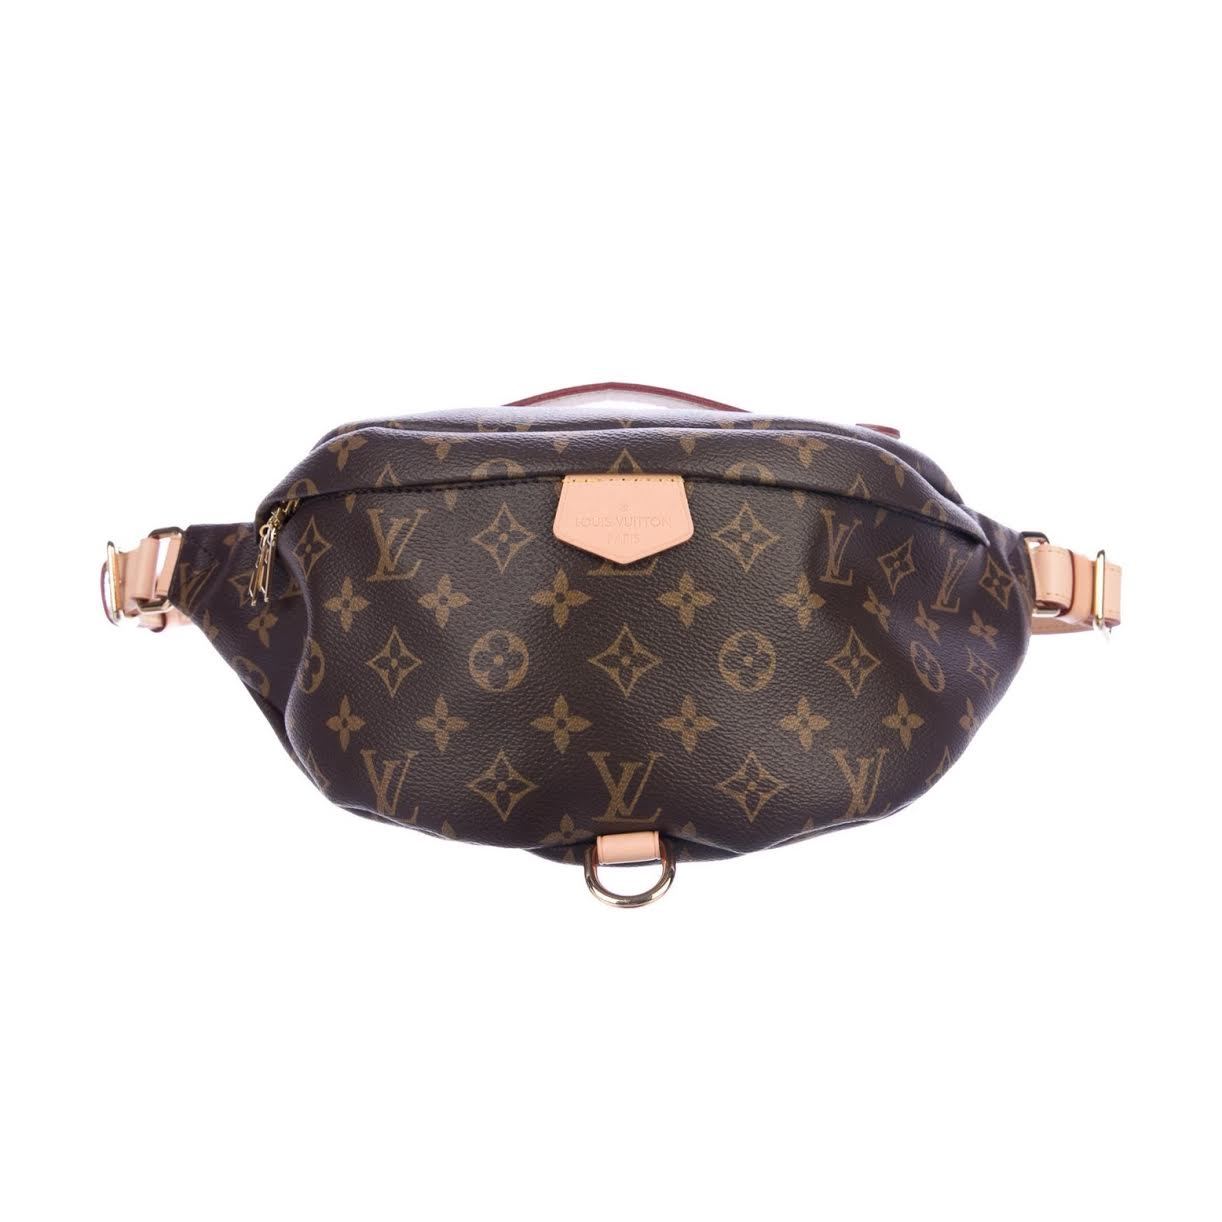 DHgate Louis Vuitton Bumbag Monogram Brown Replica Dupe Review (the link is  in the comments) : r/SammyDhGateFinds